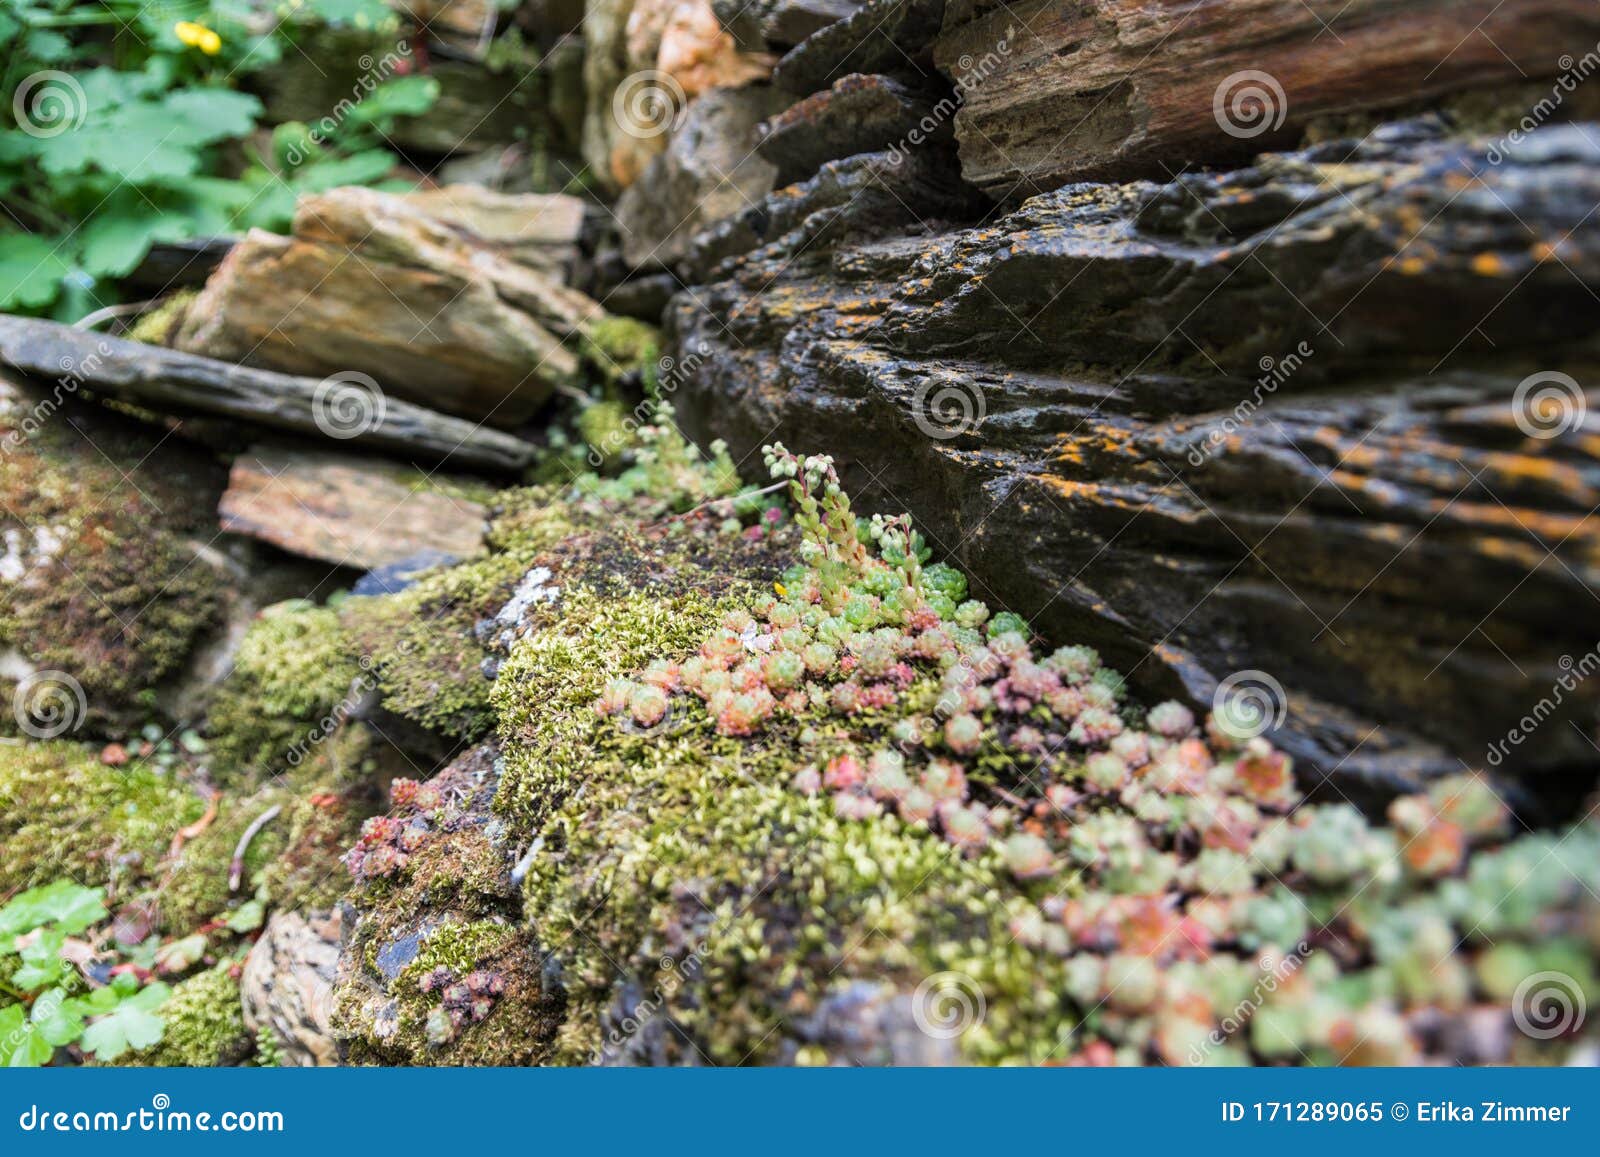 view of different textures of stone walls